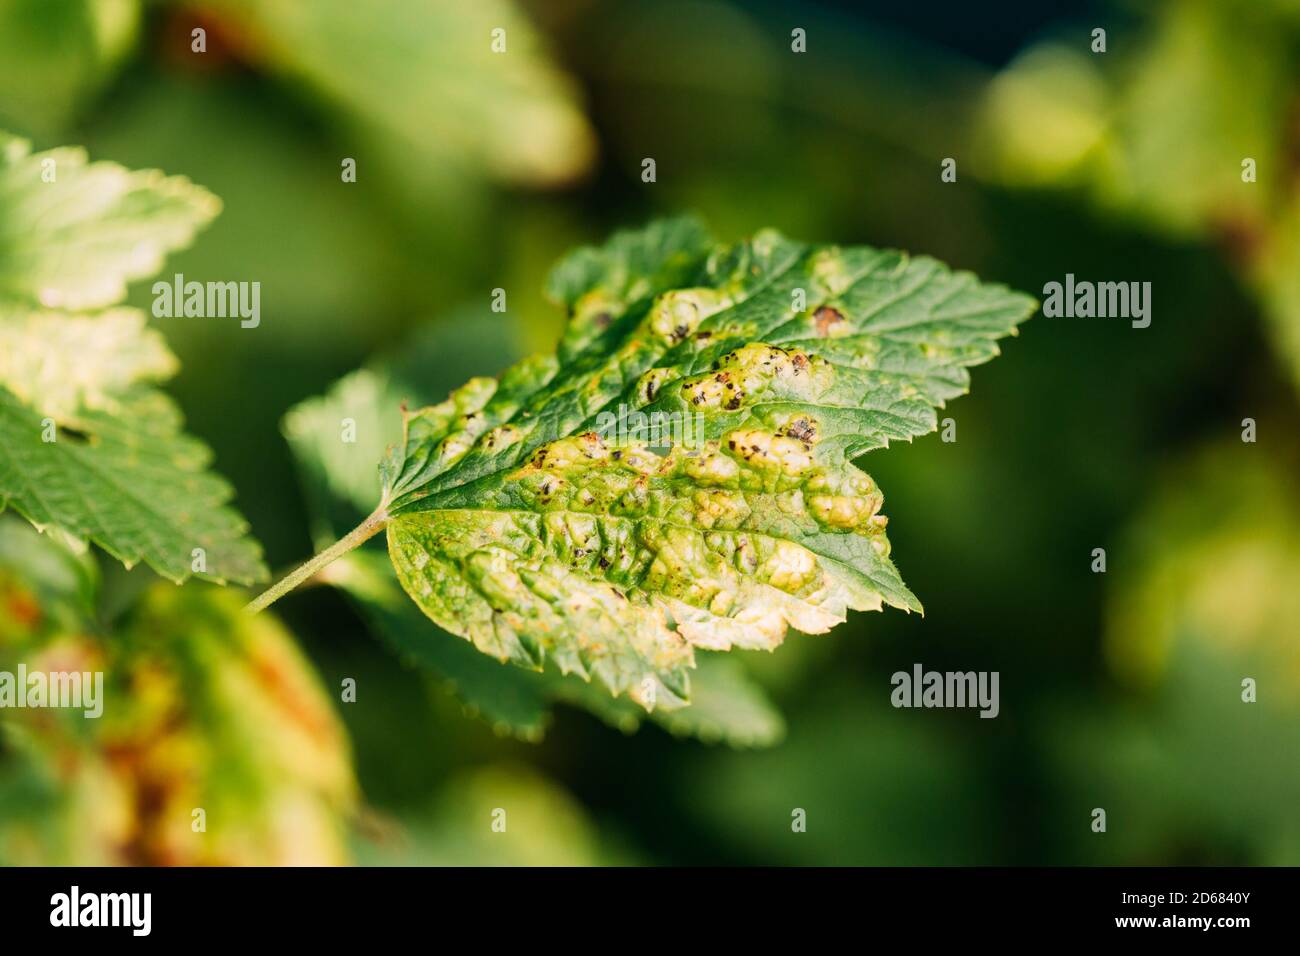 Traces Of Defeat By Leaf Gall Midges On Red Currant Leaves In Summer Sunny Day Stock Photo